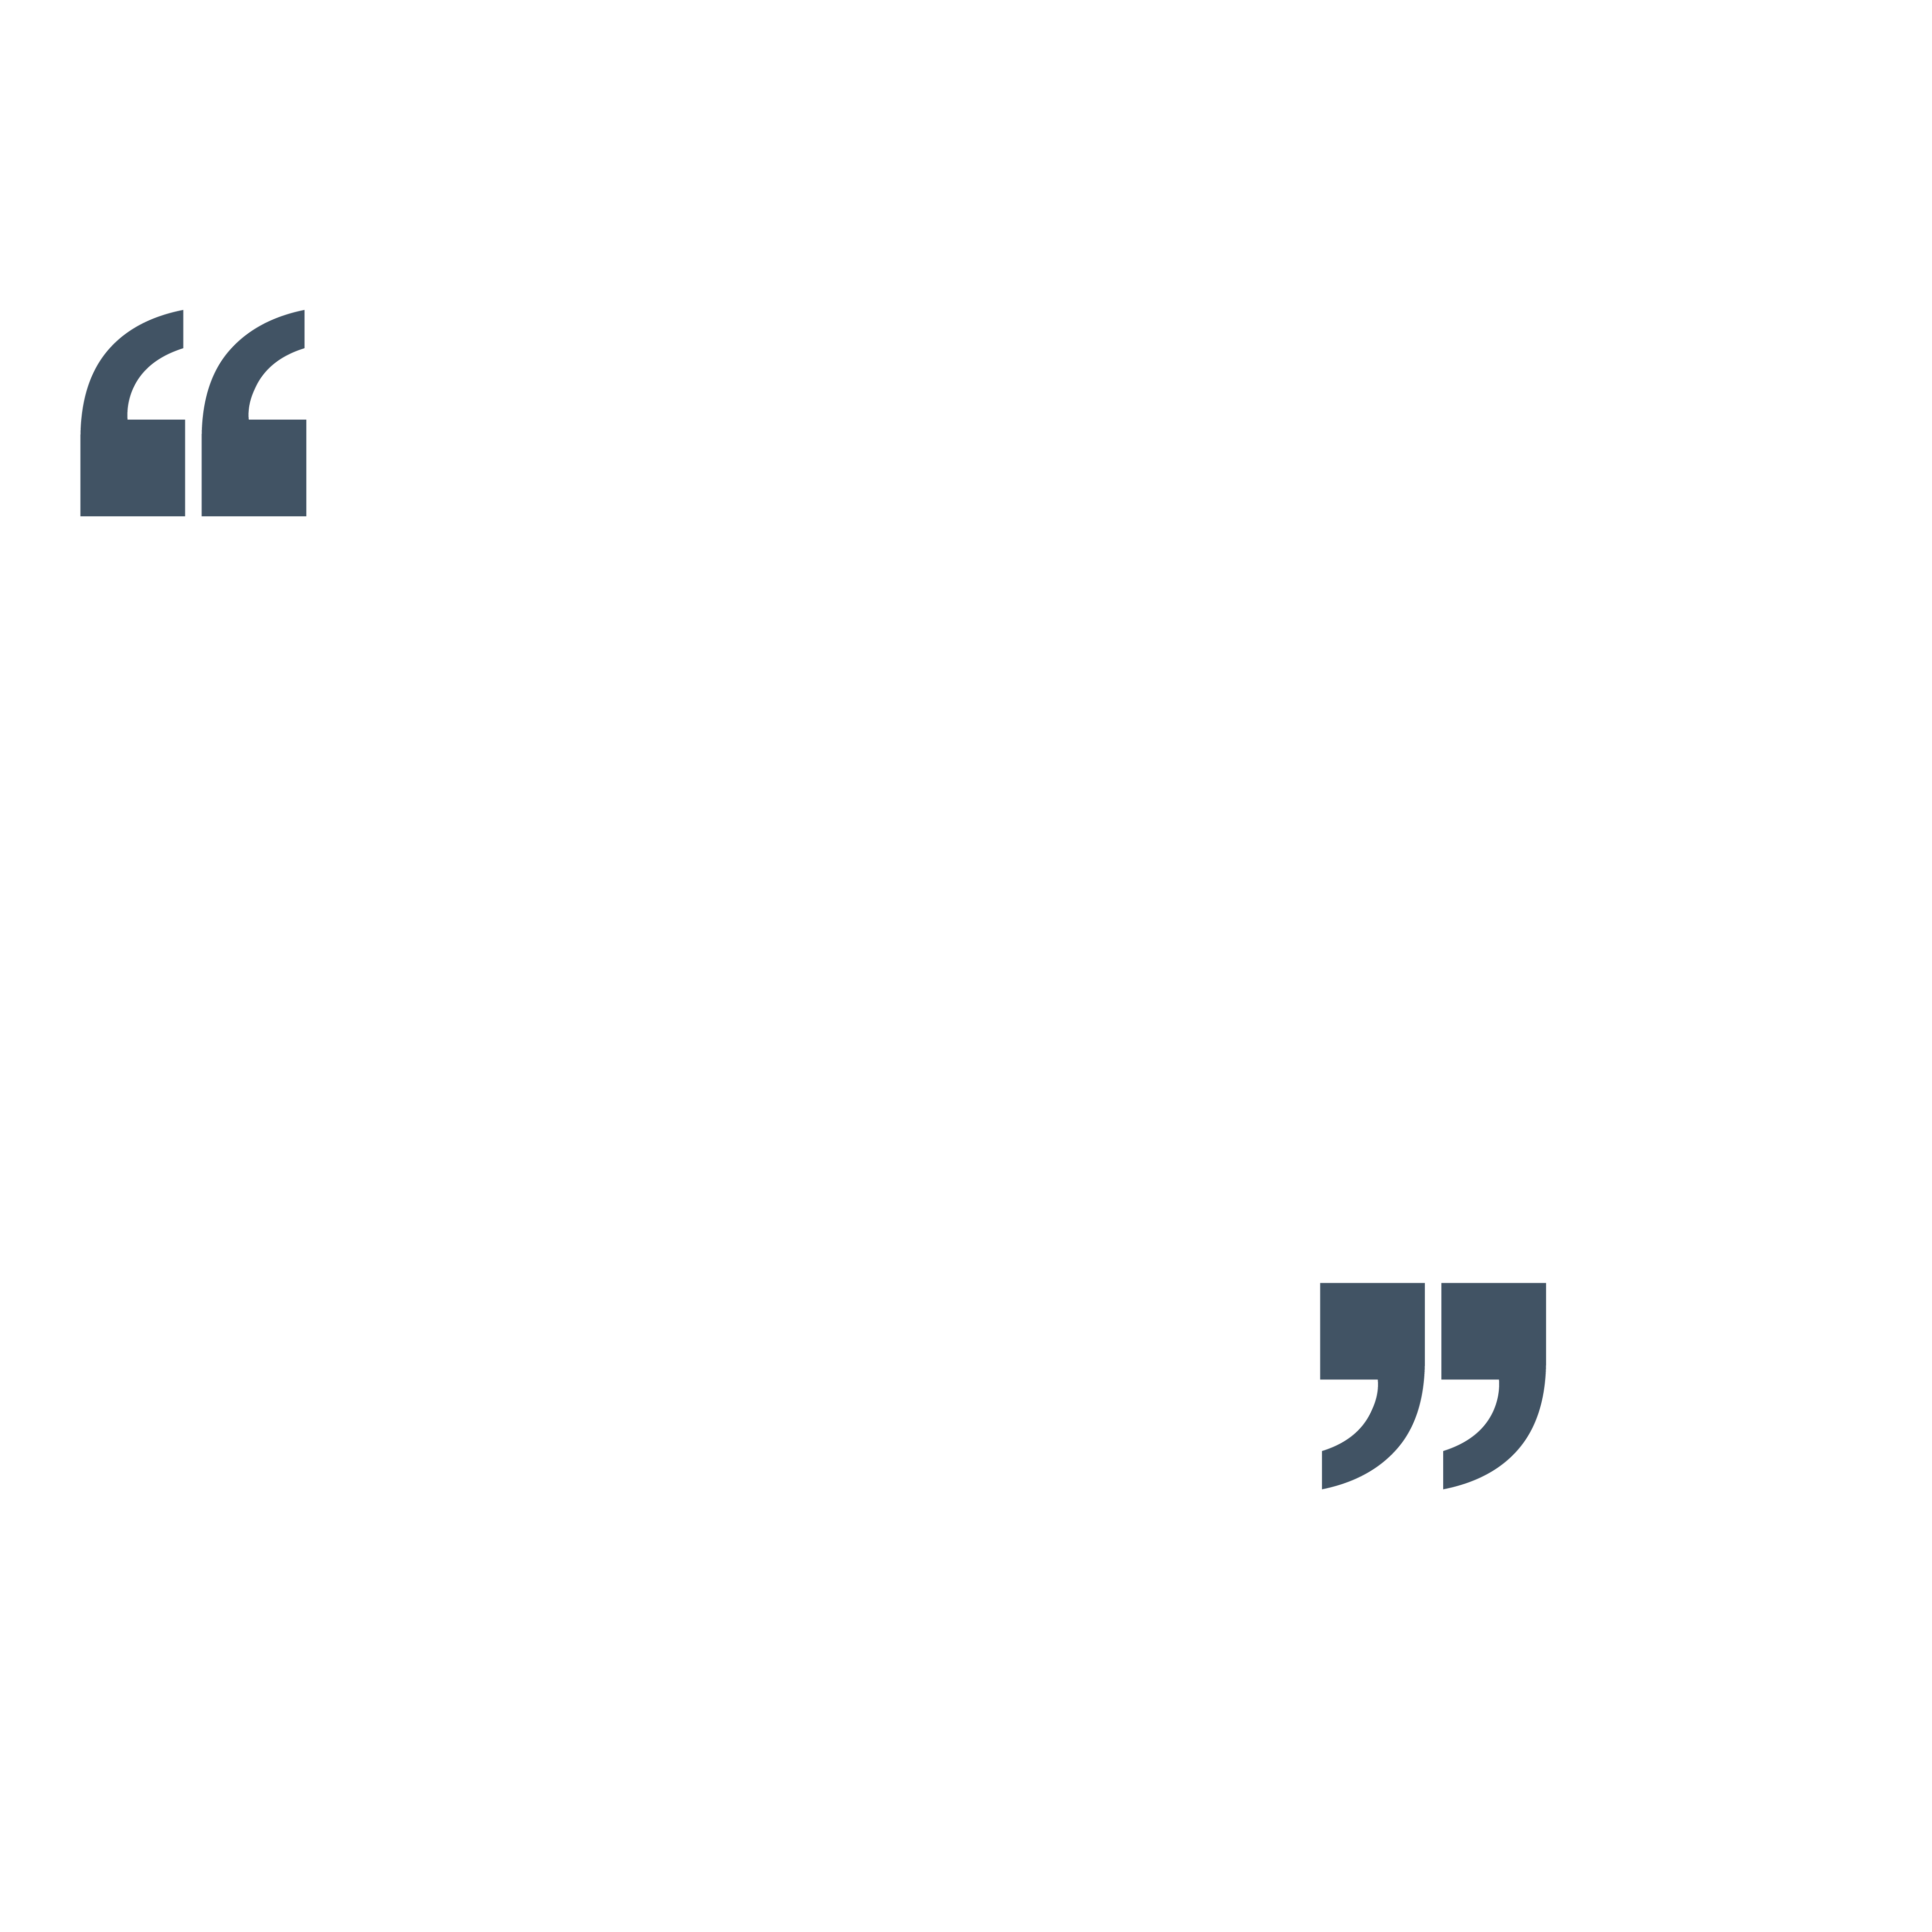 Quote from Mark Gray, Professional Development Manager Foot Anstey. "CPQ is a pathway into law that increases the opportunities and diversity of our people. It offers a flexible way to qualify and many of our people study alongside existing roles to further their careers. The three stages of CPQ mean that there are now opportunities for people at every level within our business to obtain respected qualifications. CILEX is a key part of how we develop our future talent."